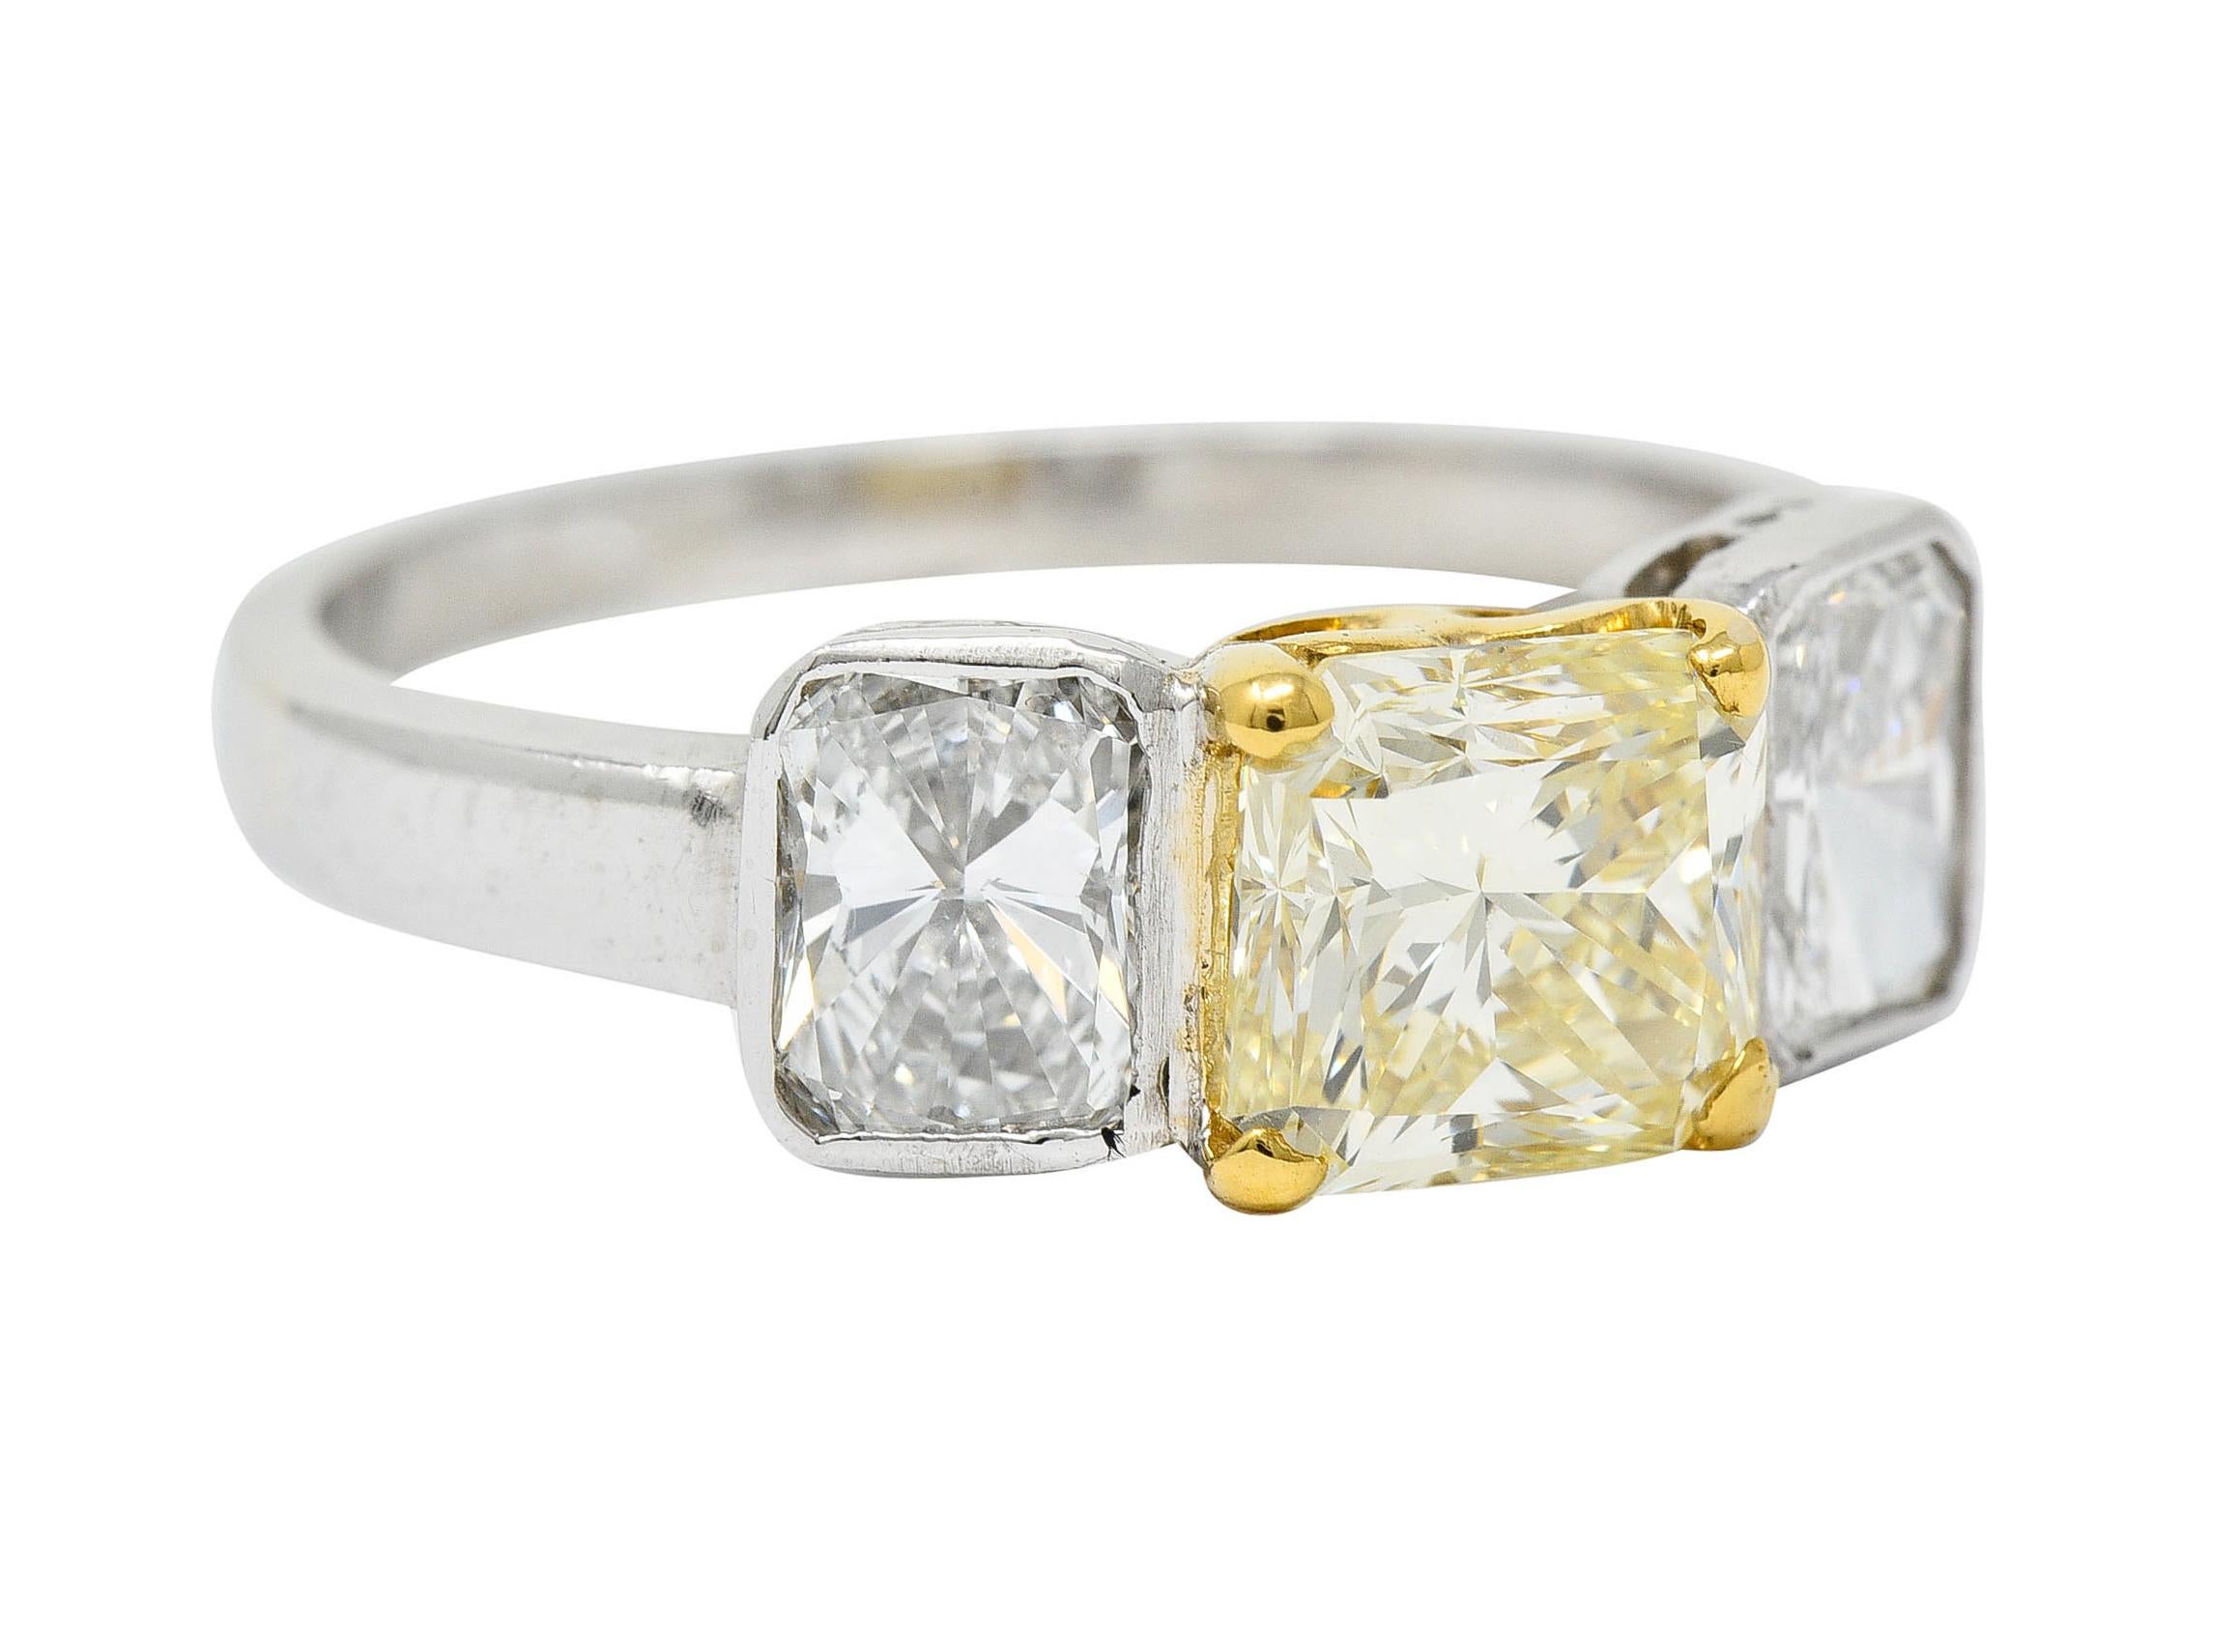 Three stone ring centers a radiant cut fancy colored diamond weighing approximately 1.60 carats

Basket set in yellow gold and features fancy yellow color with VS clarity

Flanked by two radiant cut diamonds - bezel set in platinum

Weighing in